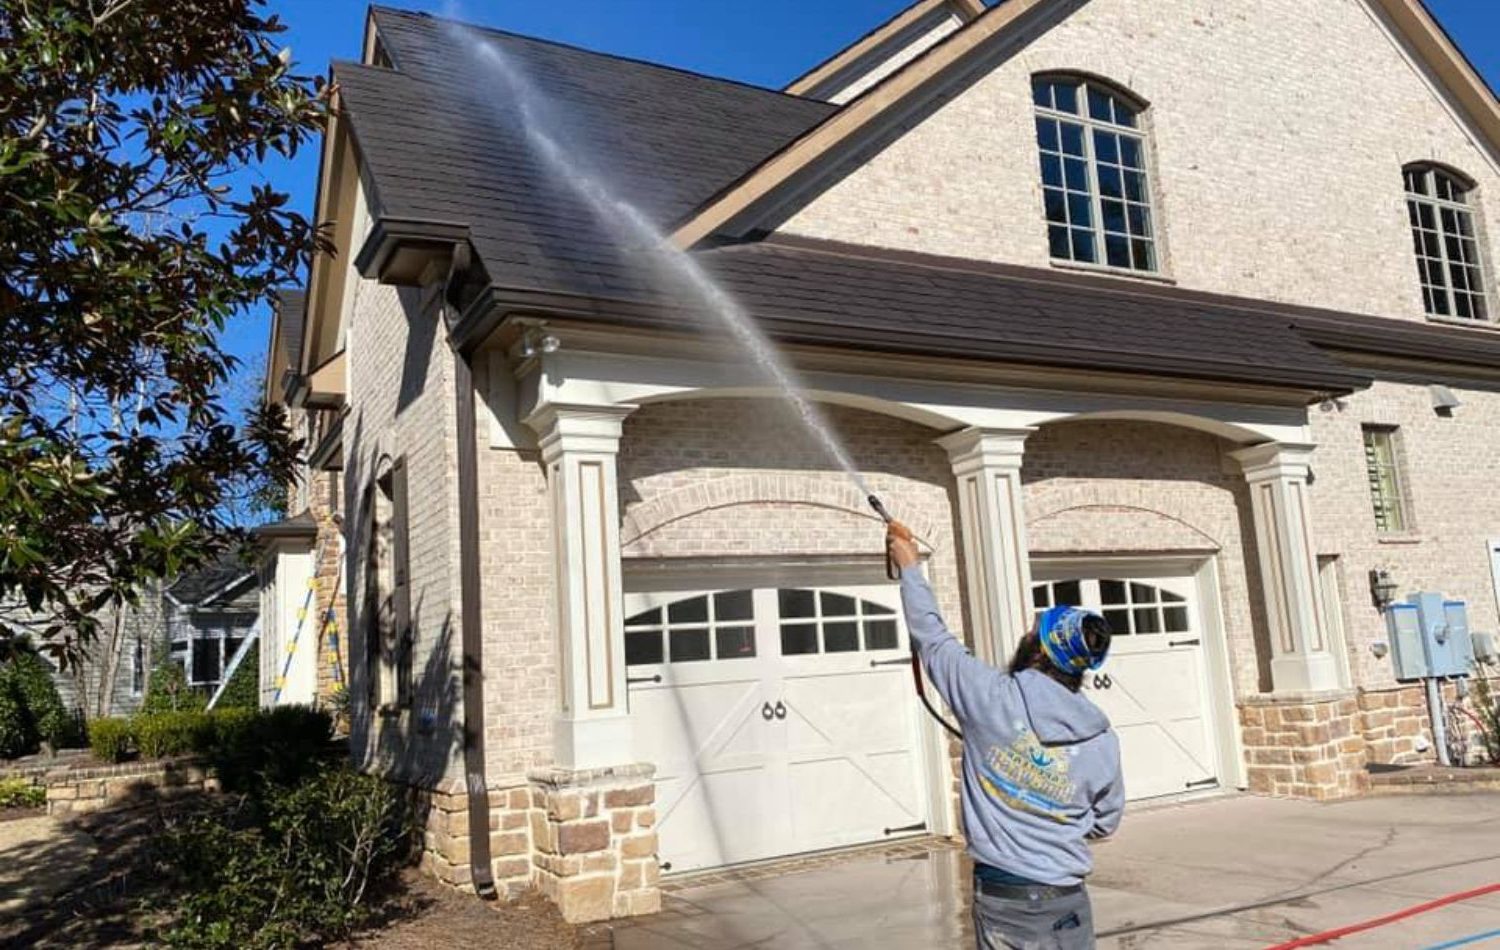 Pressure Wash Your Roof